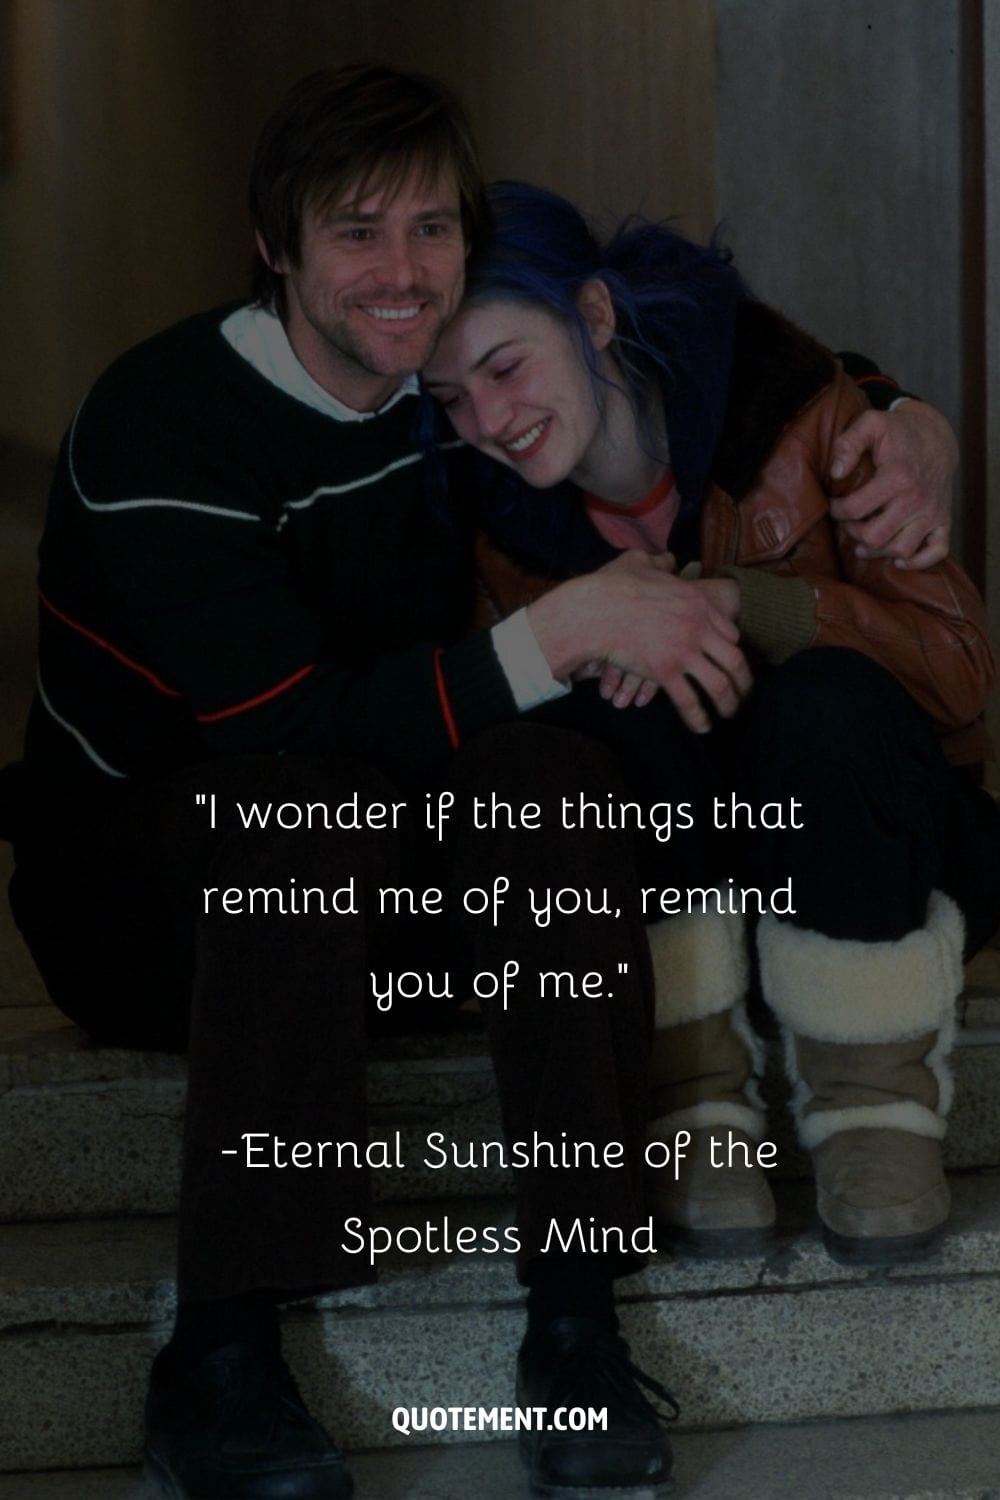 Beautiful quote from the movie Eternal Sunshine of the Spotless Mind.